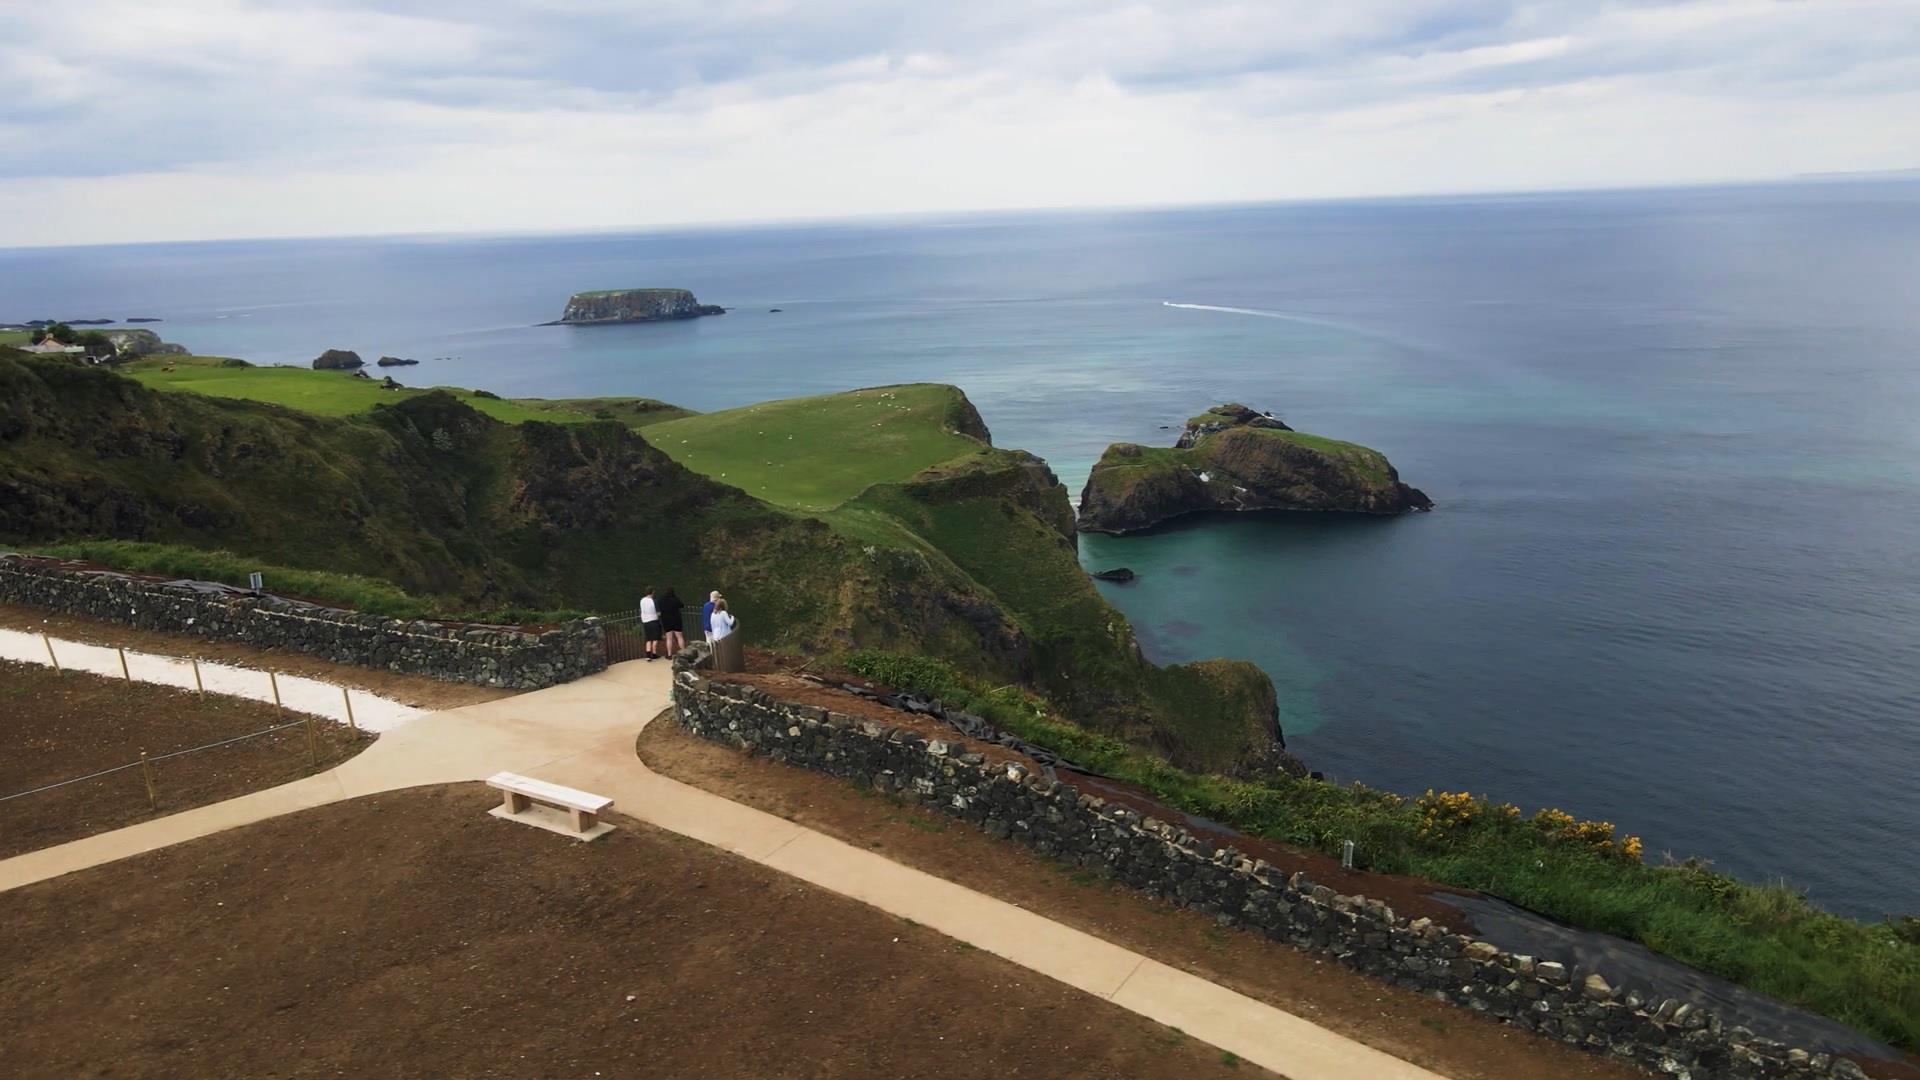 people standing on the viewing platform at Portaneevy View Point. Sheep Island and Carrick a rede island can be seen in the background